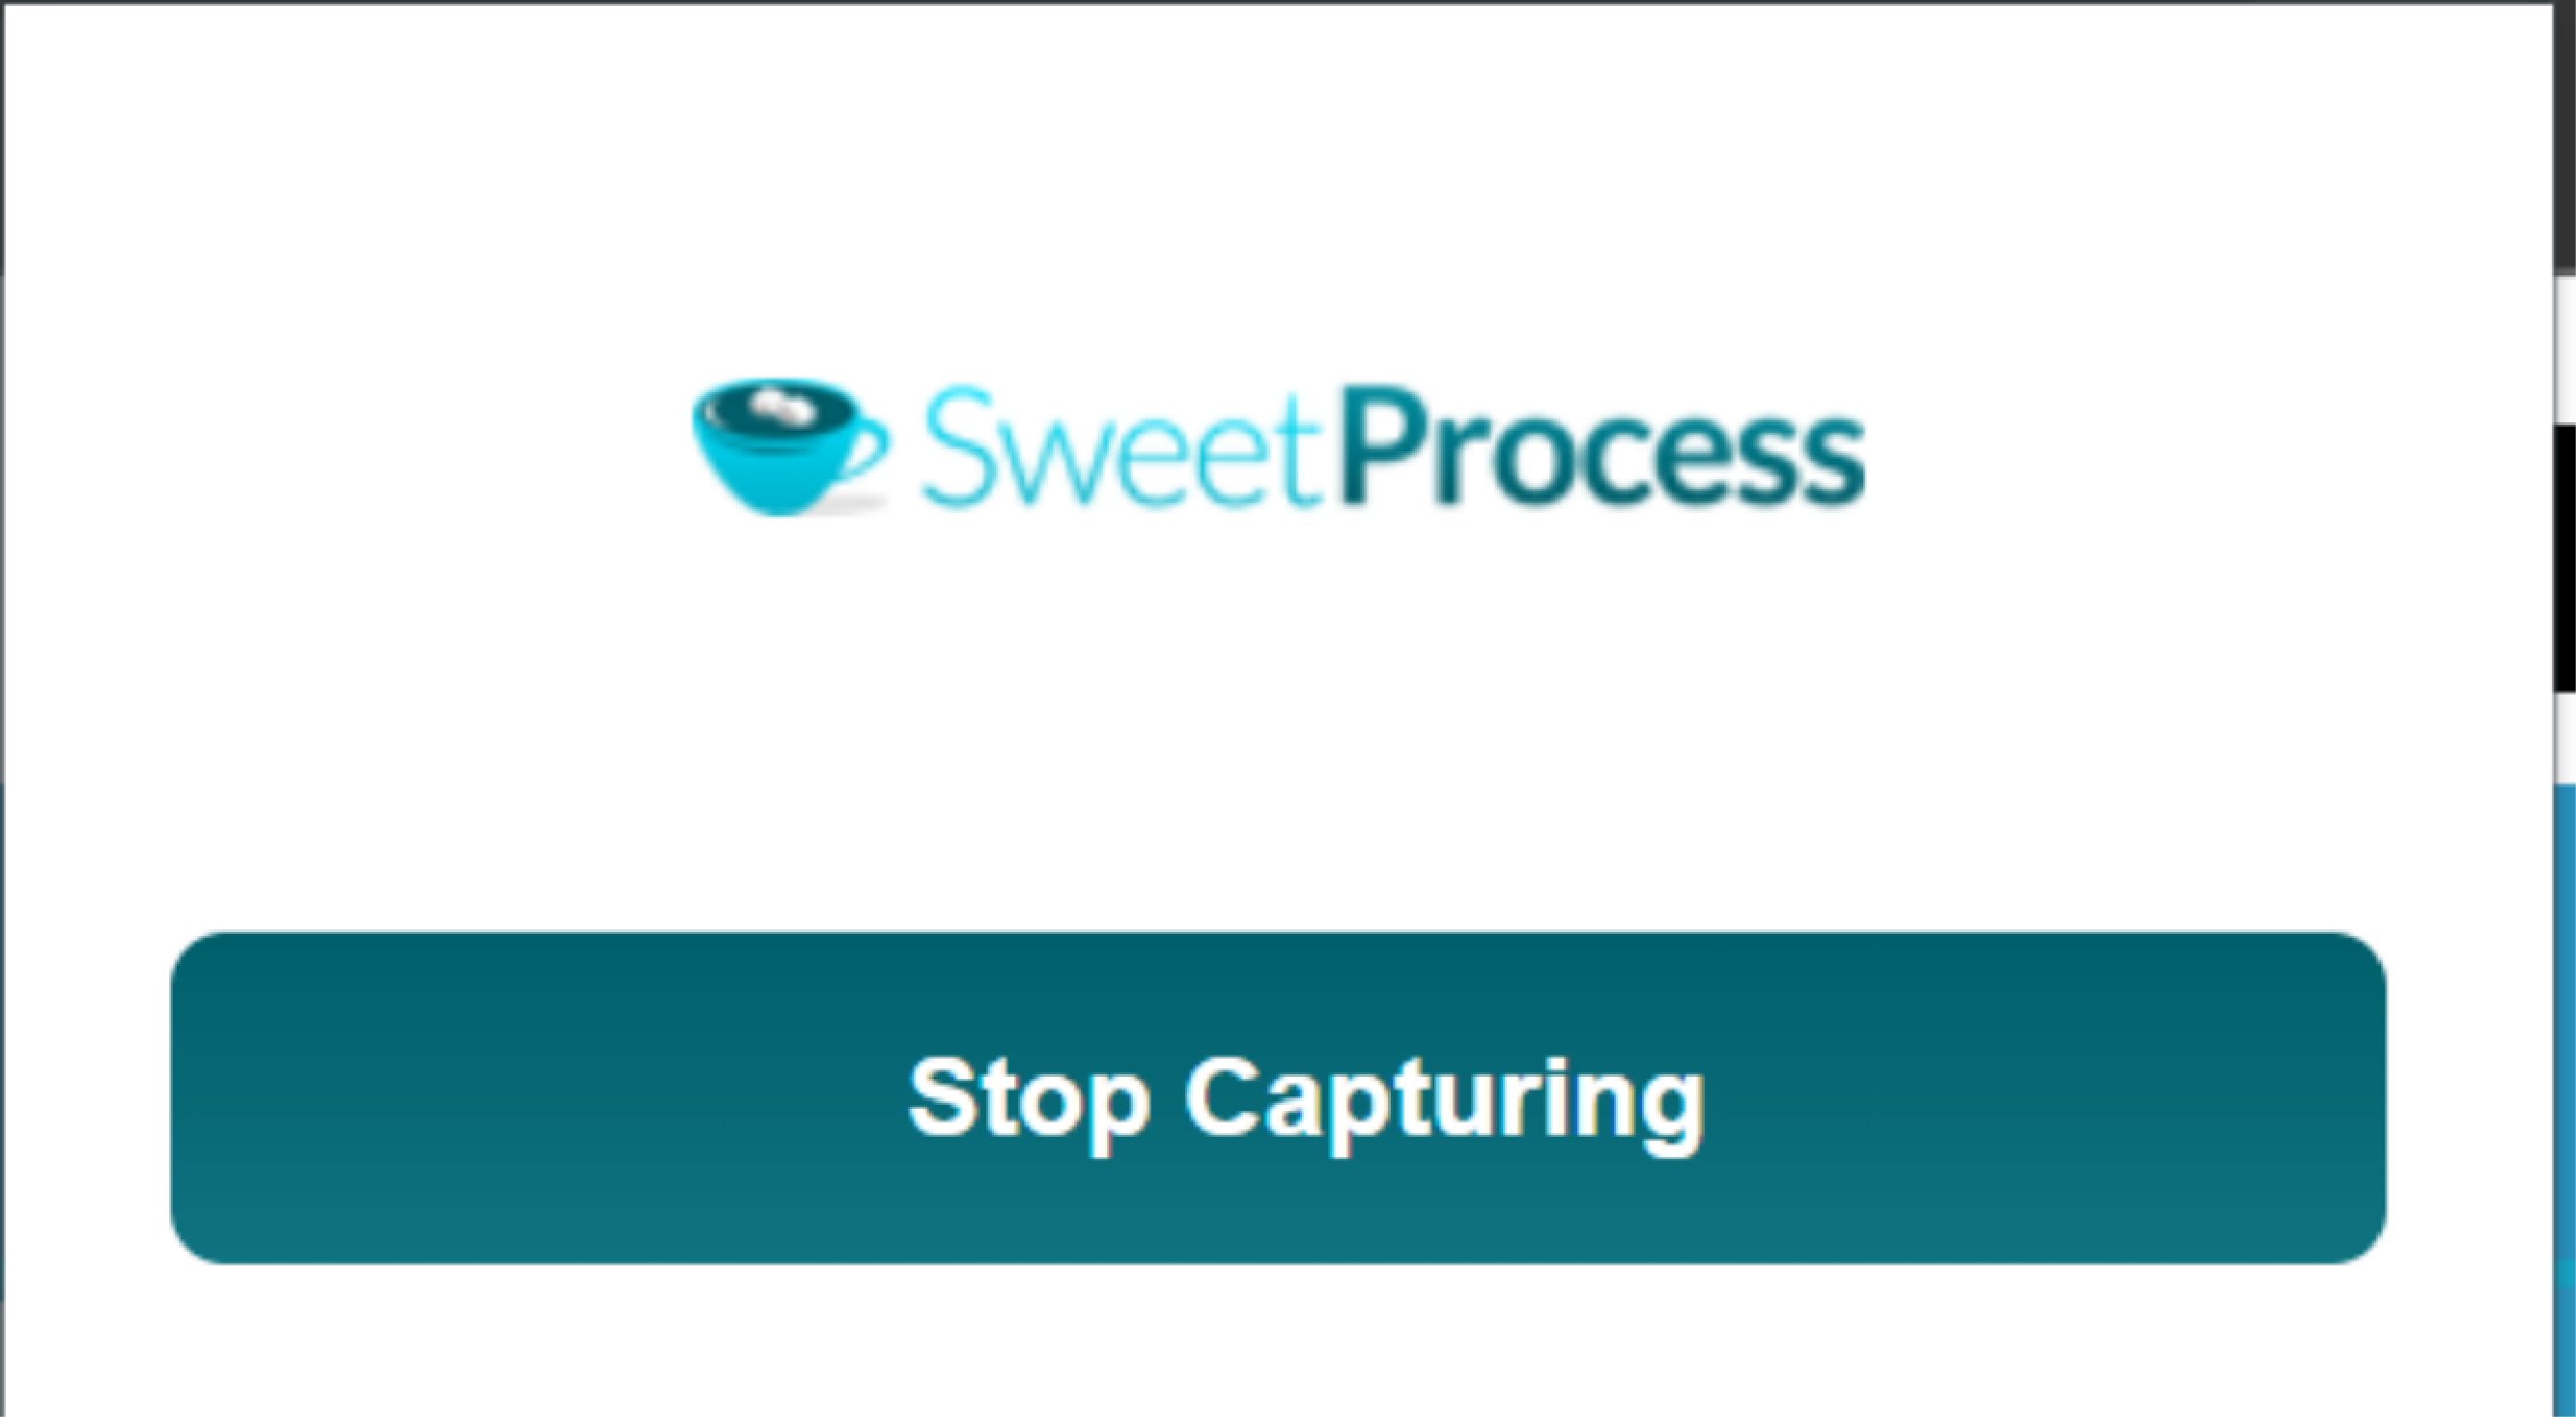 When you’re done, click “Stop Capturing.” Immediately, the SweetProcess web page will open on its own.